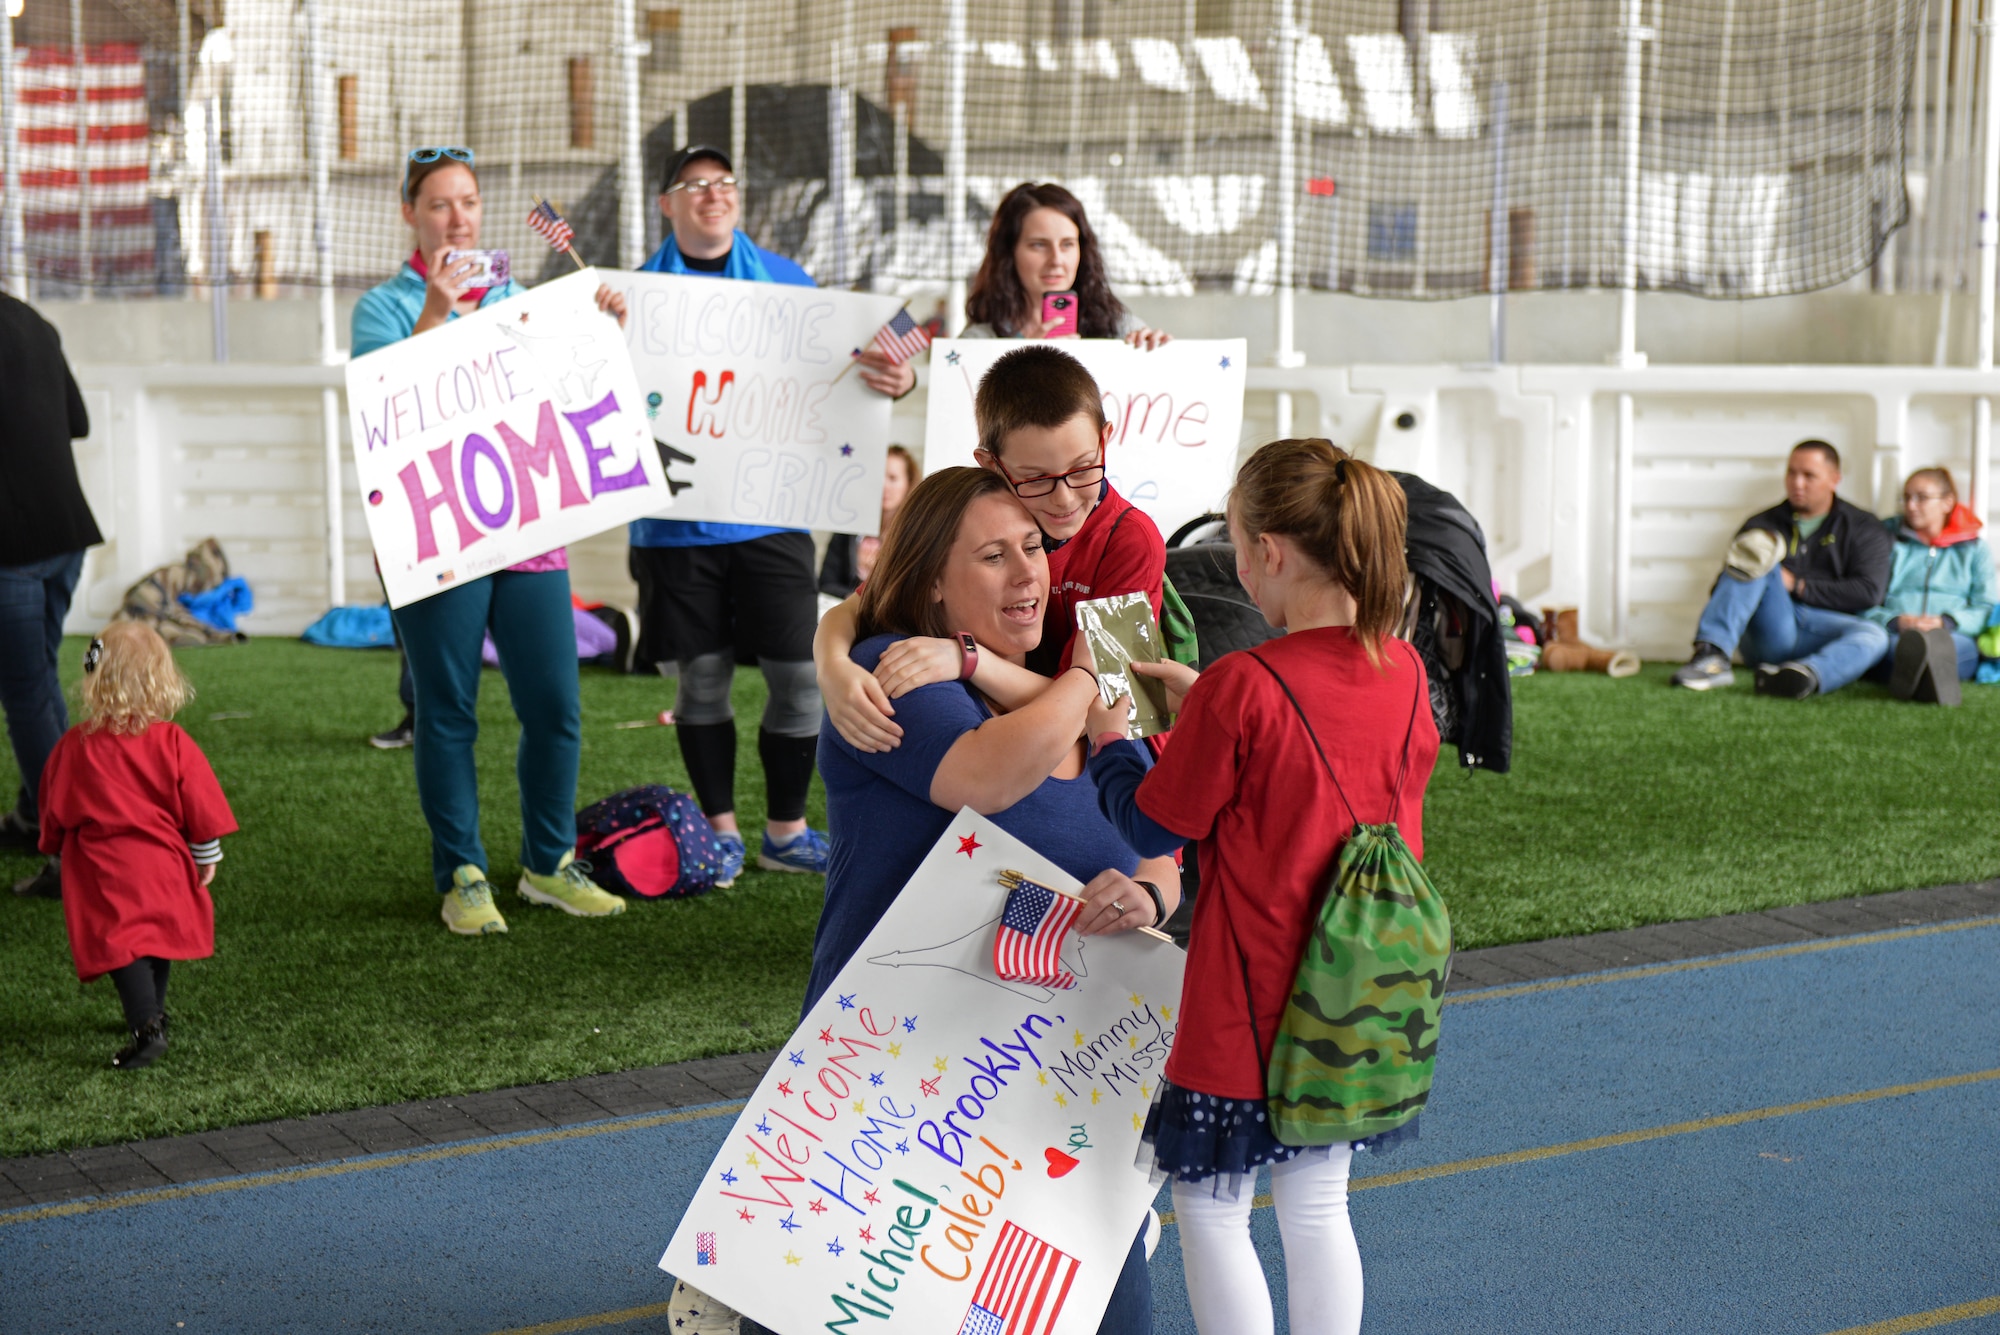 A family is reunited after a kids deployment line at Ellsworth Air Force Base, S.D., April 7, 2018. This Month of the Military Child event was coordinated by the Airman & Family Readiness Center, Youth Center and Child Development Center. (U.S. Air Force photo by Airman 1st Class Nicolas Z. Erwin)